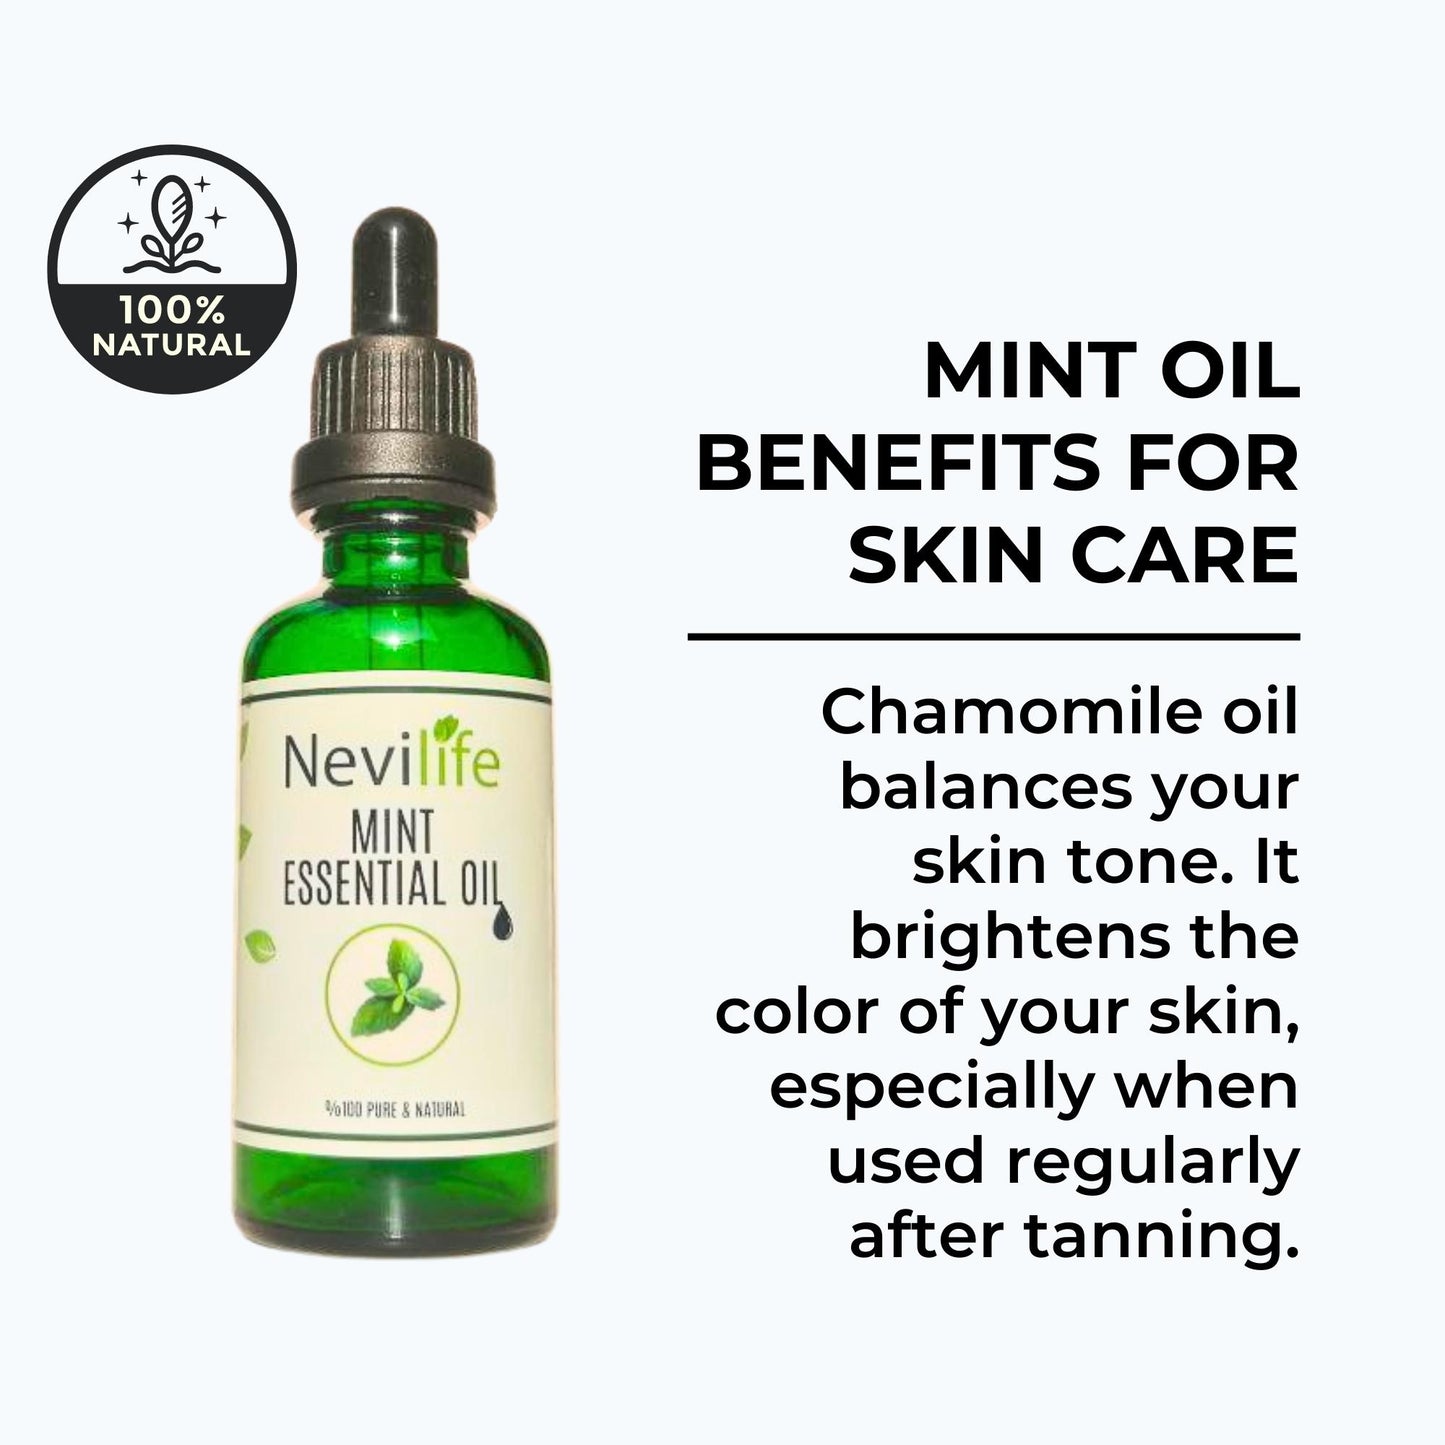 Organic Peppermint Oil, Mint Essential Oil, Aromatherapy, Skin Care, Hair Care, Sinus Reliever